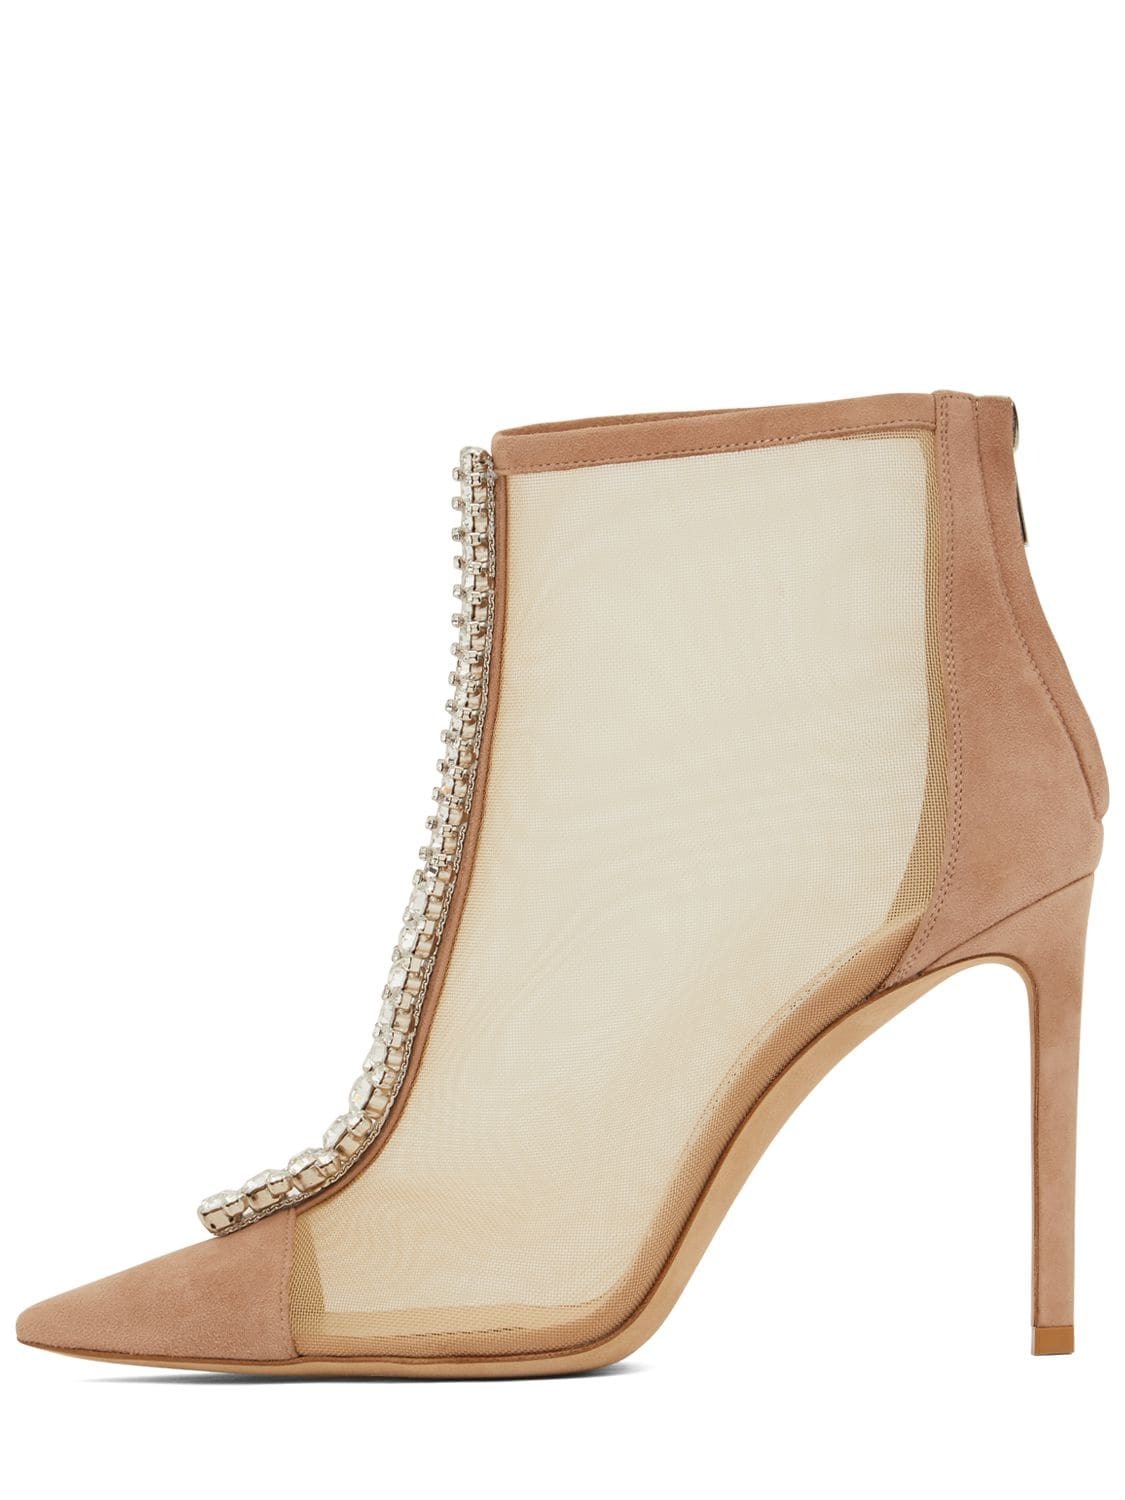 JIMMY CHOO 100mm Bing Mesh & Suede Ankle Boots